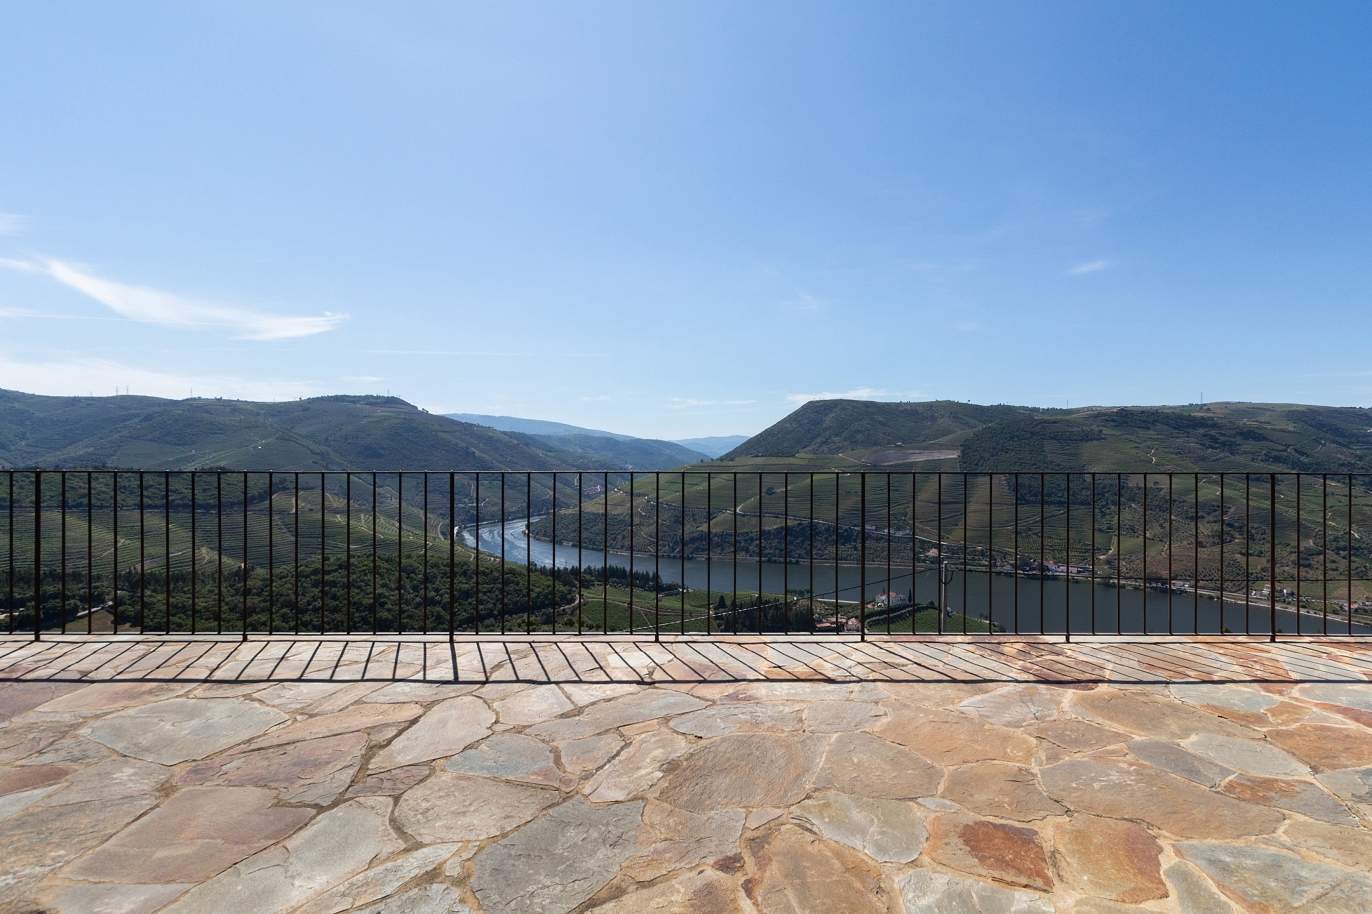 Sale country house in vineyard w/ river views, Douro Valley, Portugal_171501